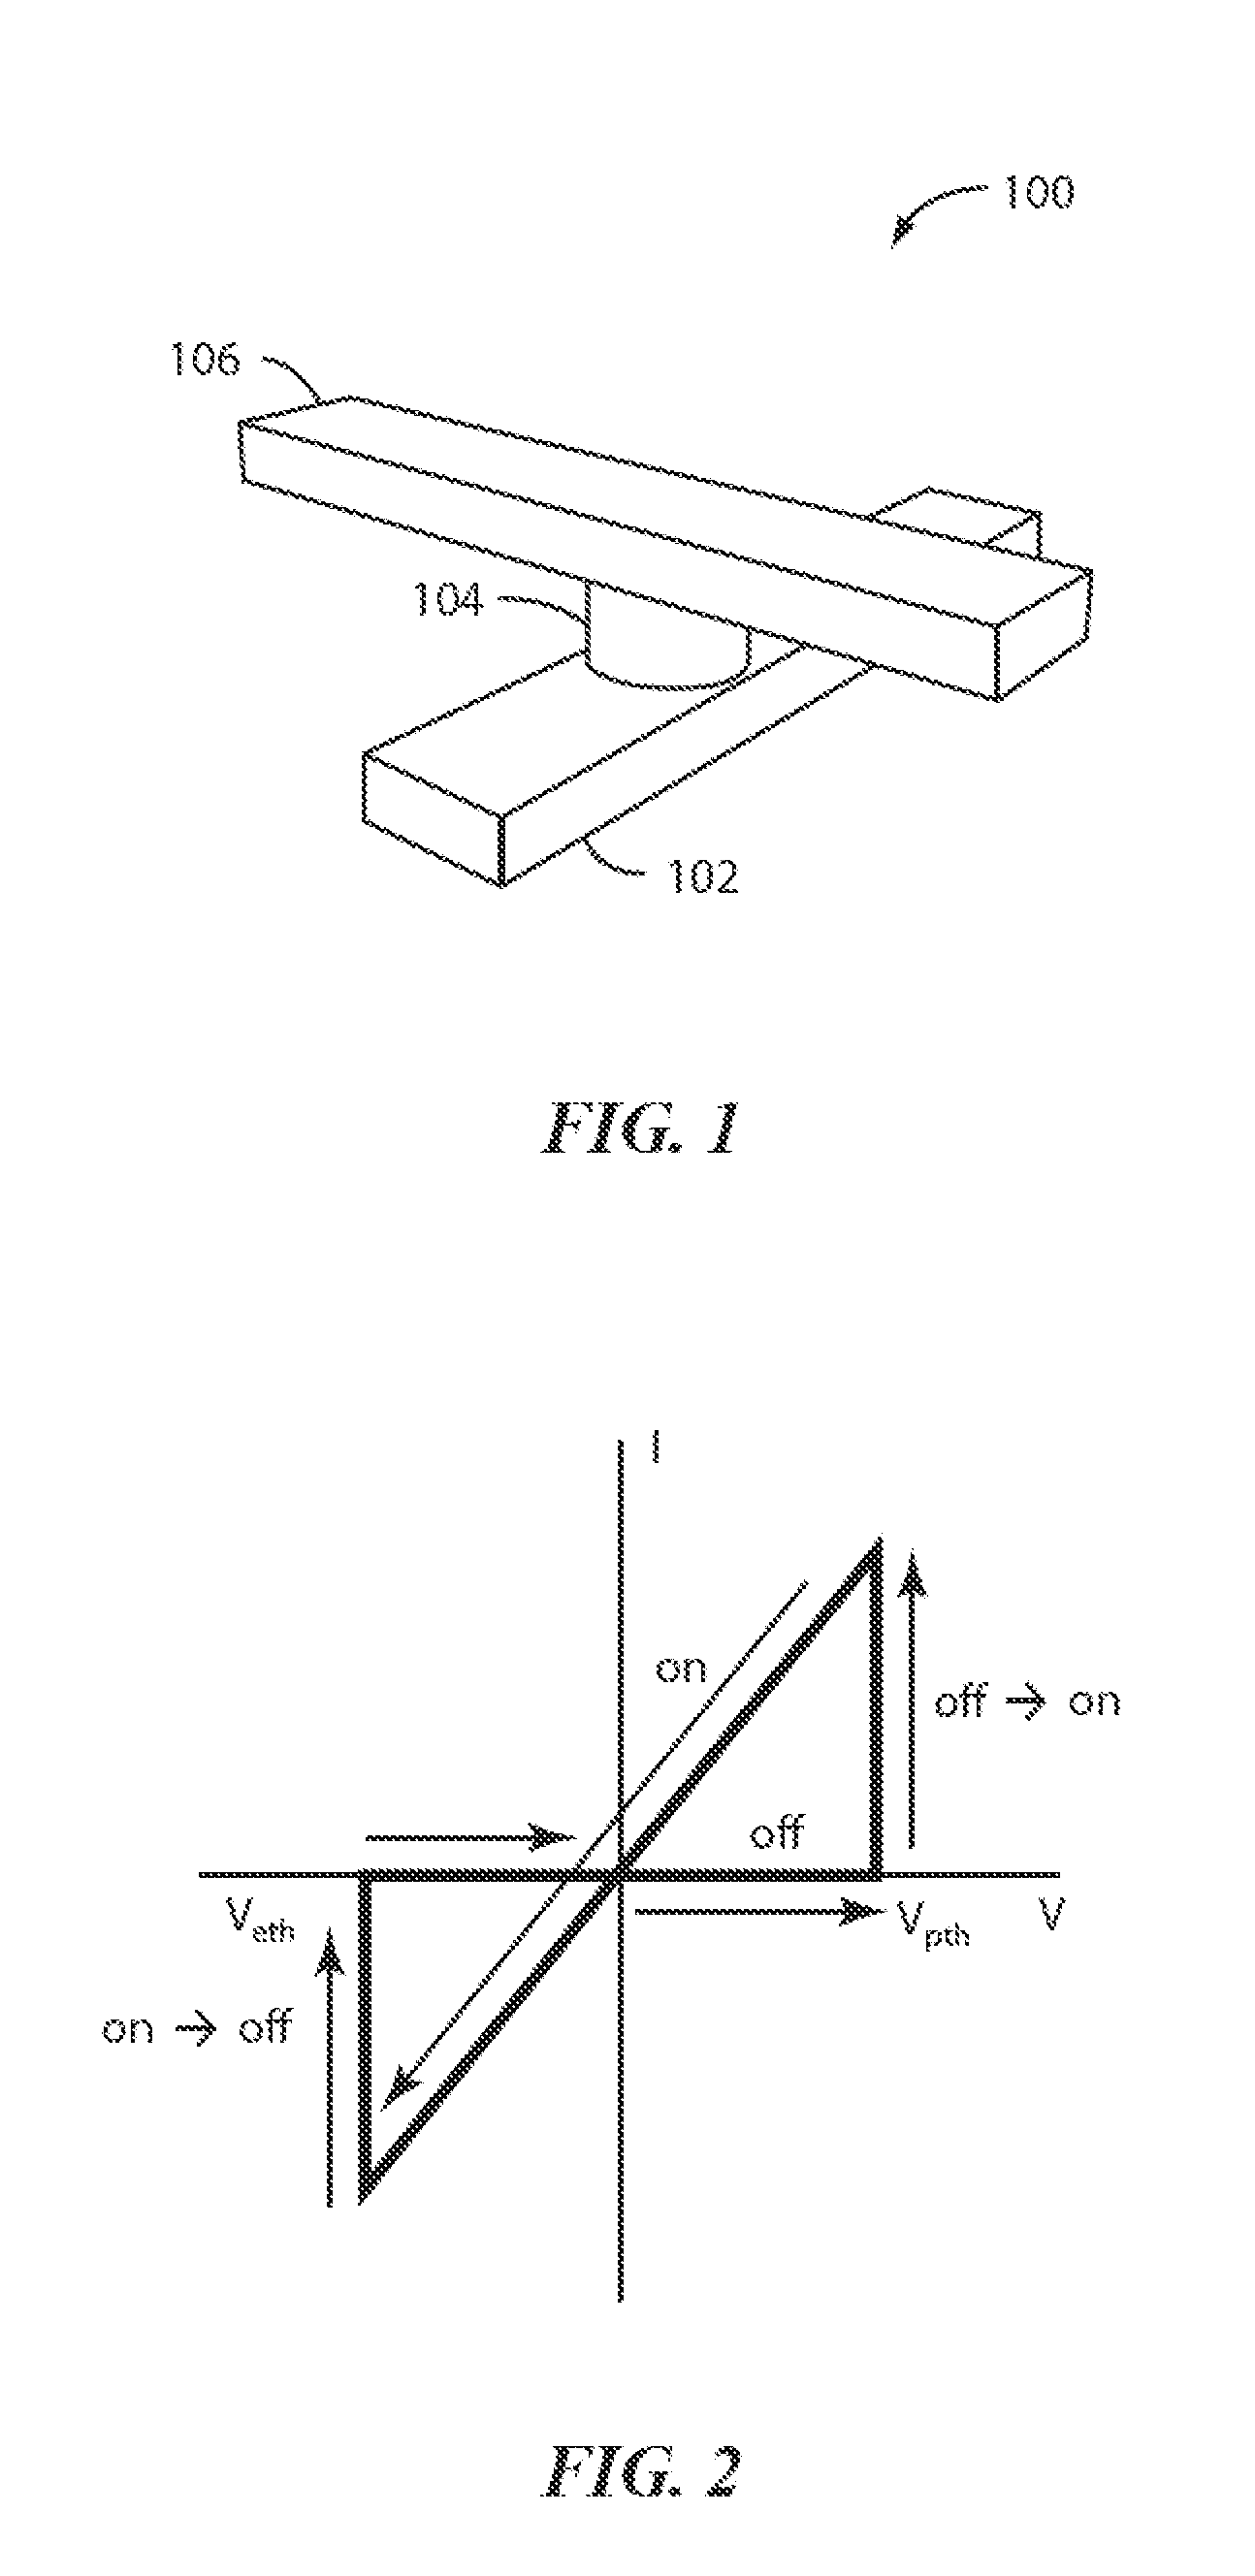 Interface control for improved switching in rram